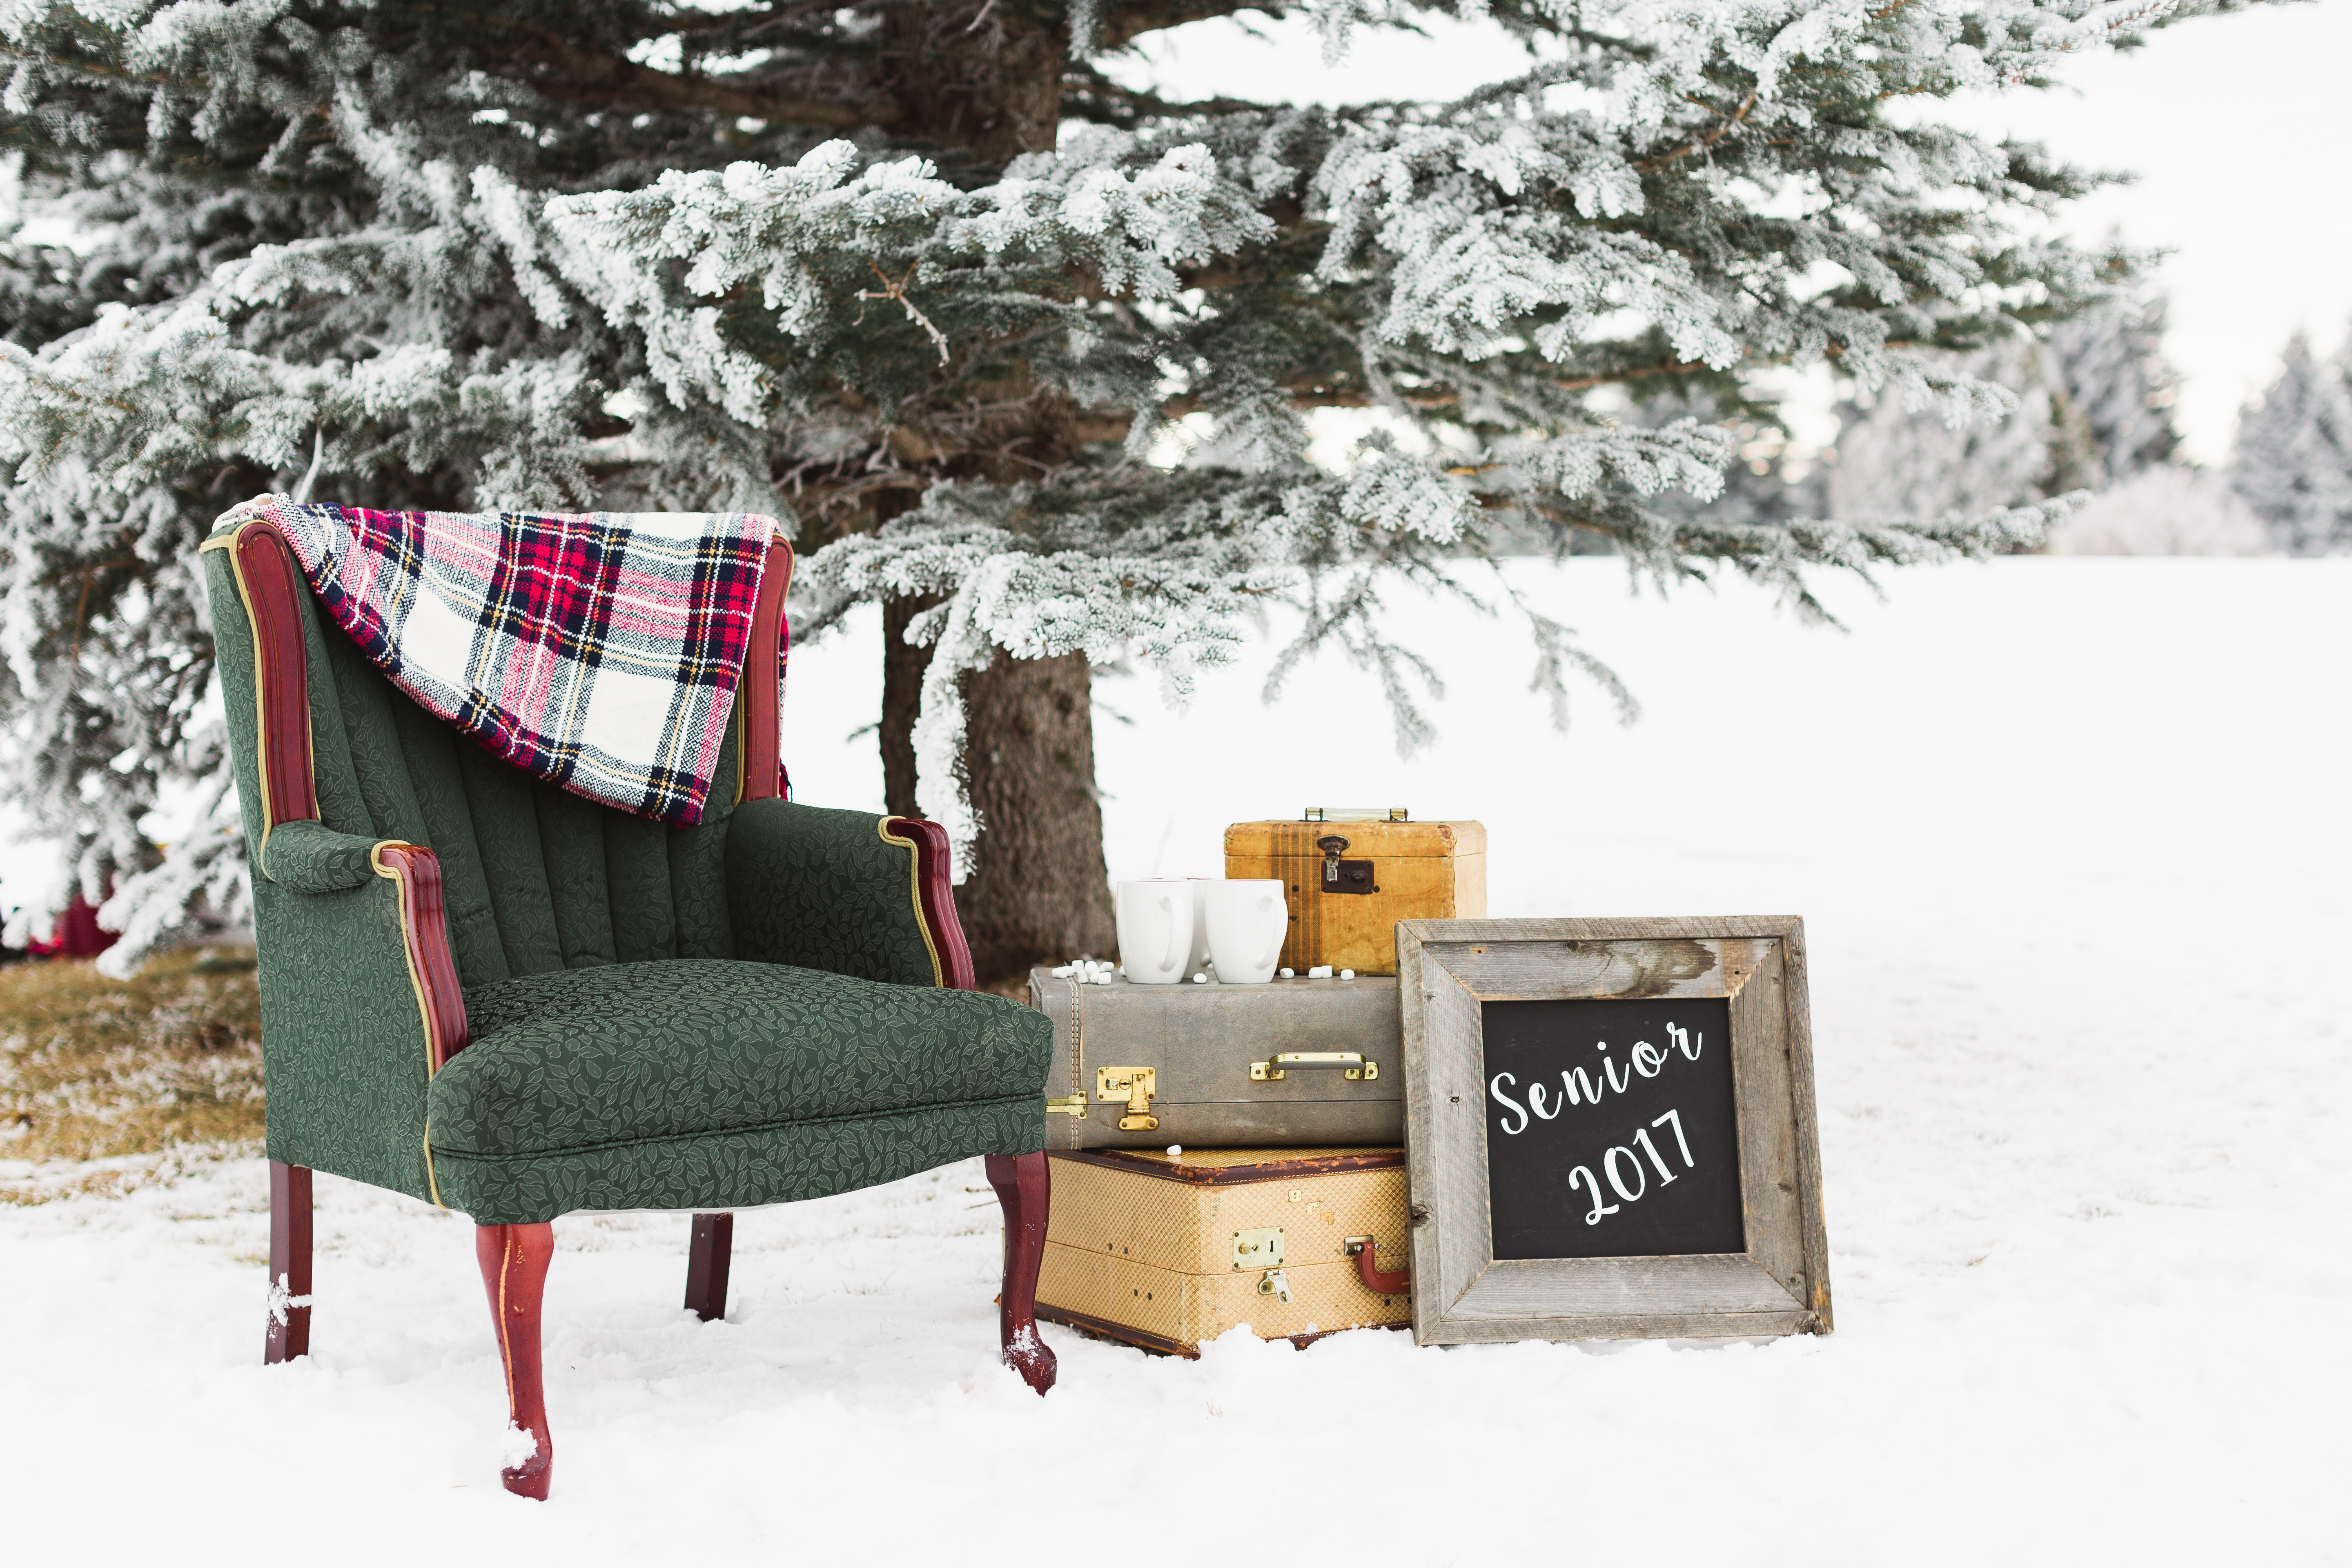 A green antique arm chair sits next to vintage suitcases and decorative chalkboard with senior 2017 written on it for a styled winter senior photo session